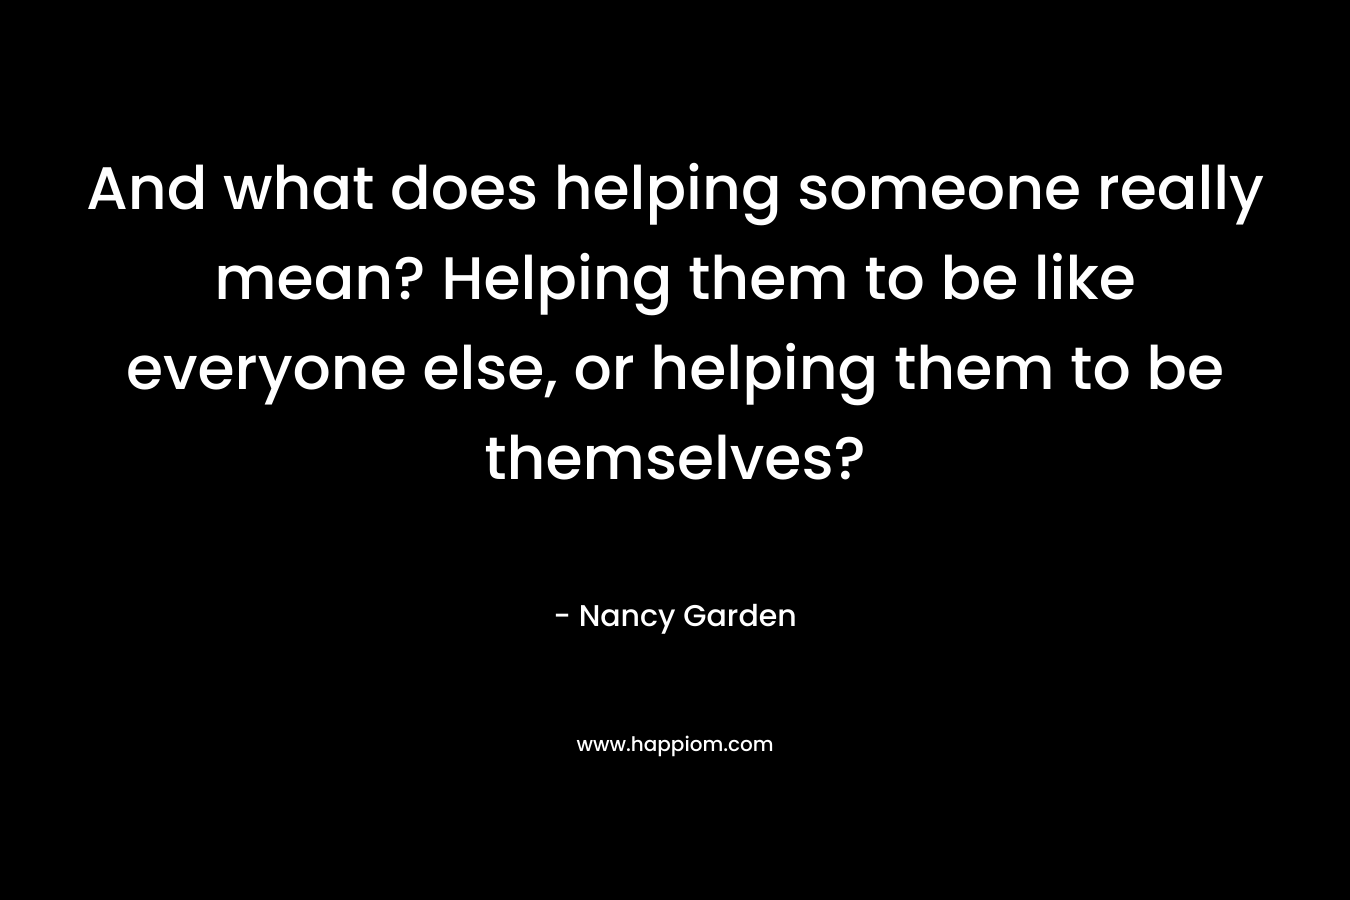 And what does helping someone really mean? Helping them to be like everyone else, or helping them to be themselves?